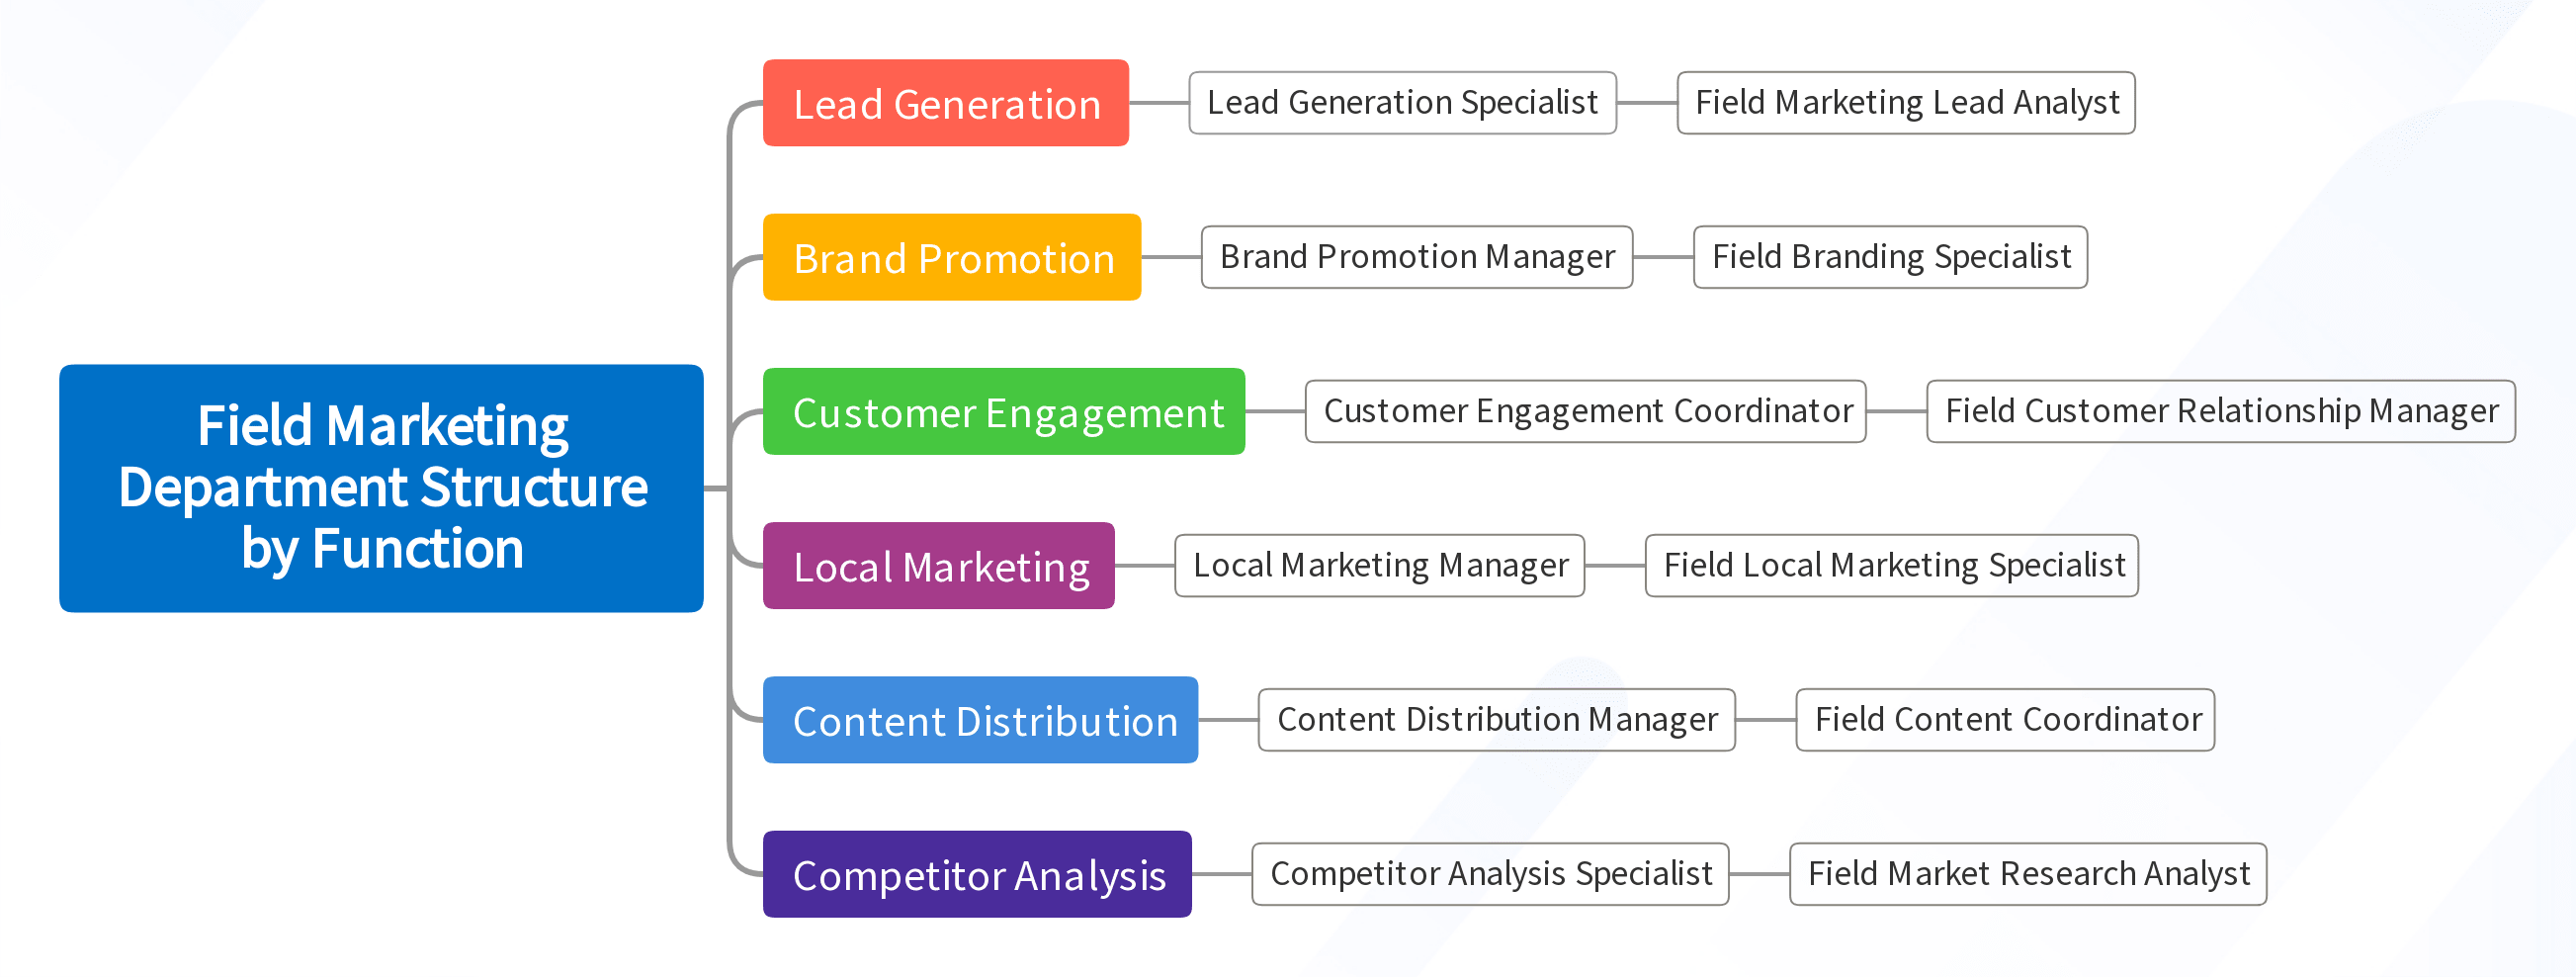 Field Marketing Department Structure by Function